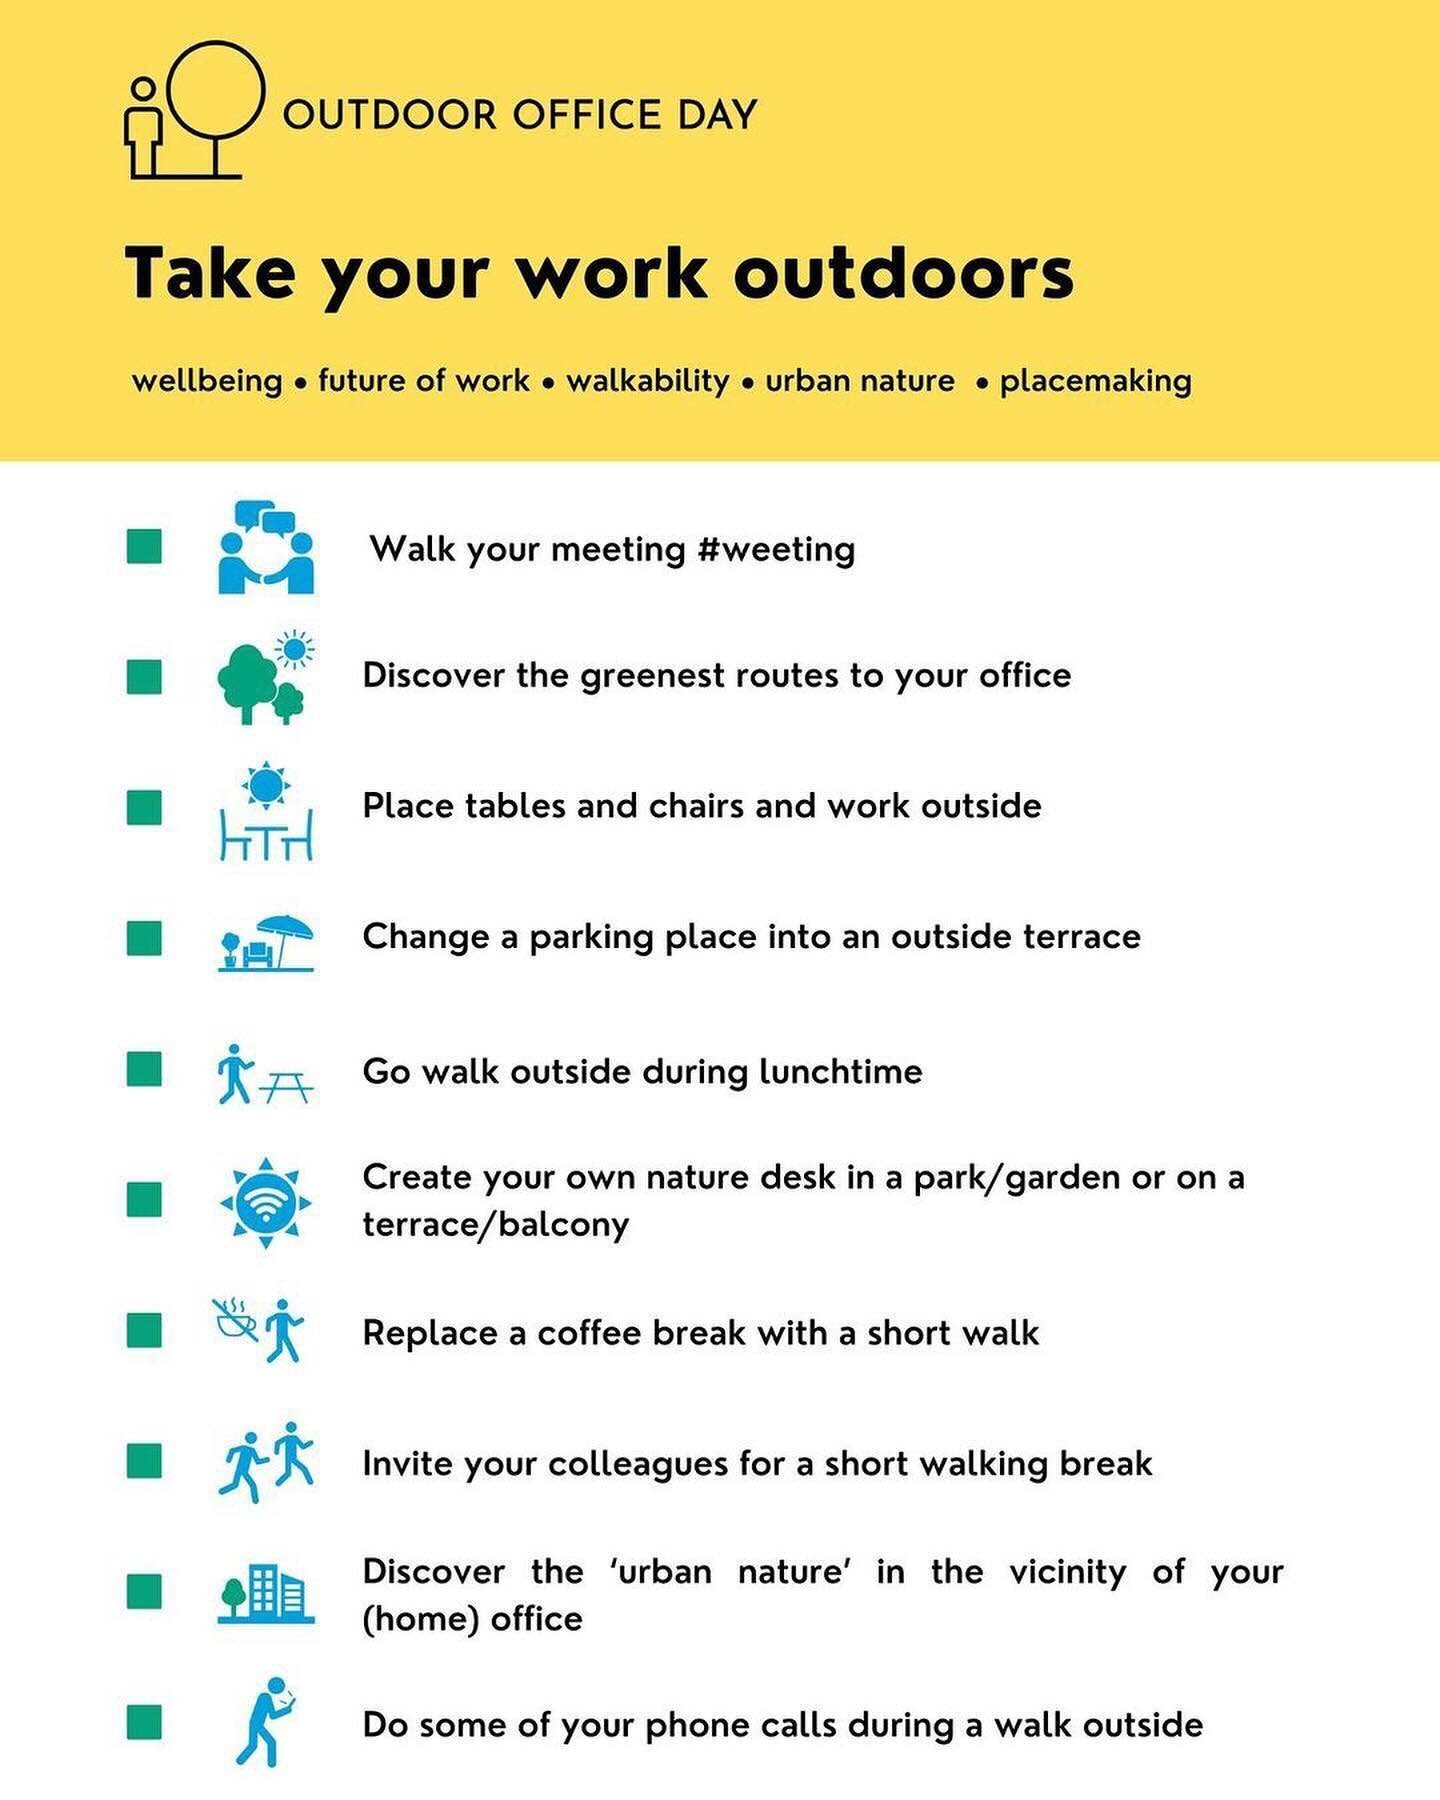 #outdoorofficeday posters 🇳🇱🇬🇧🇺🇸🇩🇪🇷🇴 🇫🇷🇫🇮 are here. Download them on https://lnkd.in/ejc42PMV &amp; tick some boxes!
🚶🏻&zwj;♀️🚶🏿&zwj;♂️☕️📚🎧👩🏻&zwj;💻🌳🌱

💚 &amp; thank you for the translations 🇩🇪 Ulli Wackenroder&nbsp;myBusin